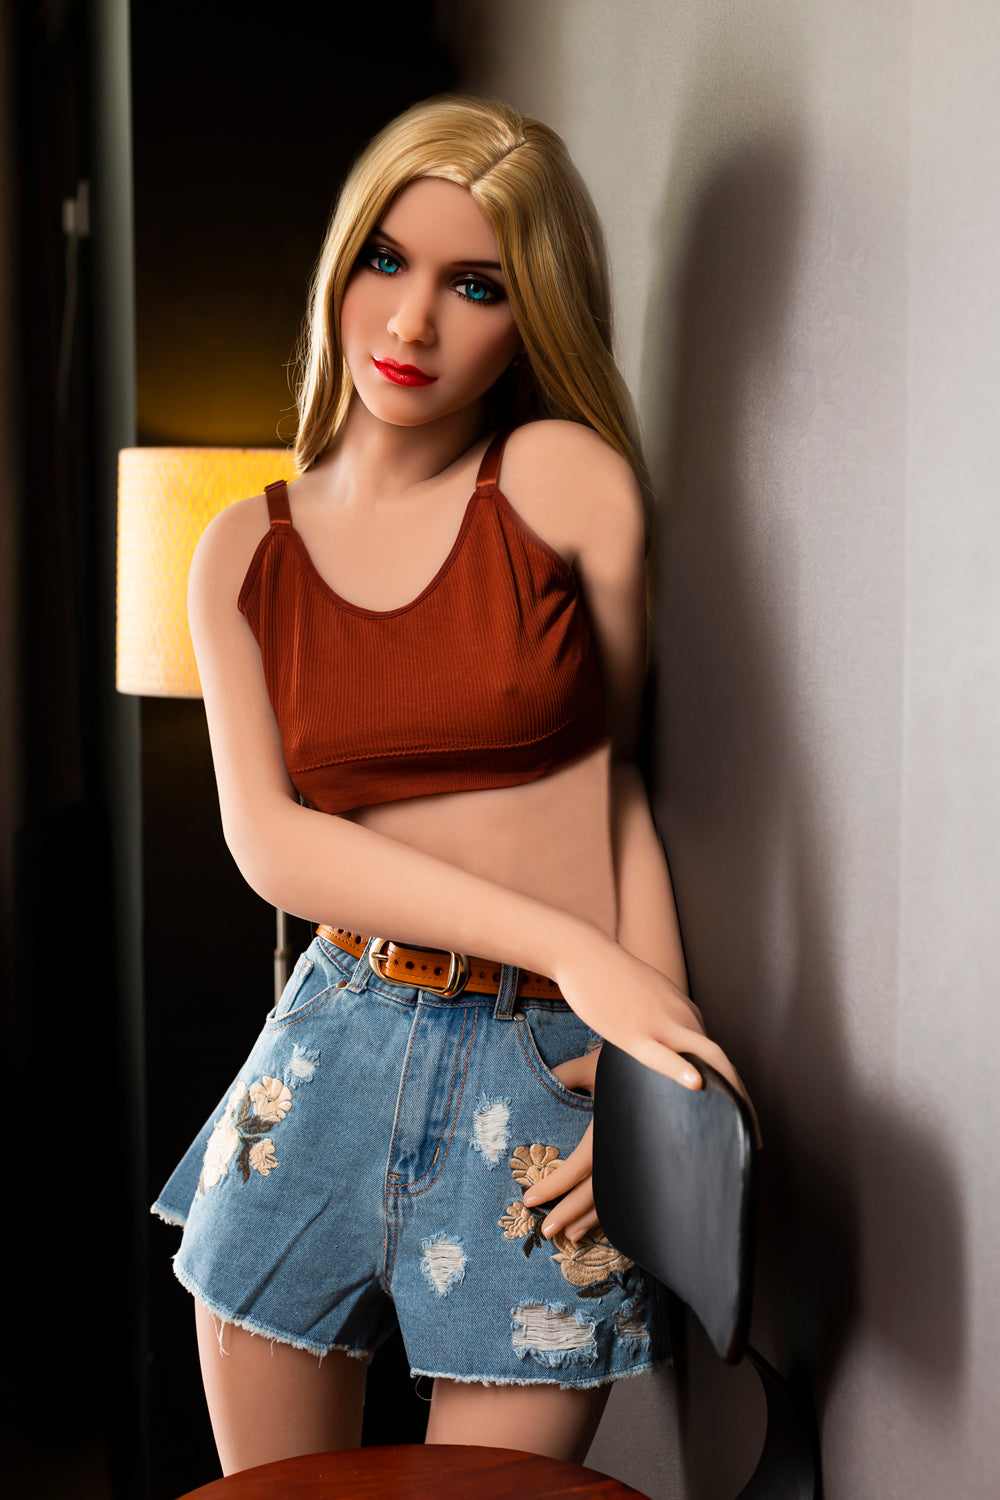 HR Doll 166 cm TPE - #16 (USA) | Buy Sex Dolls at DOLLS ACTUALLY